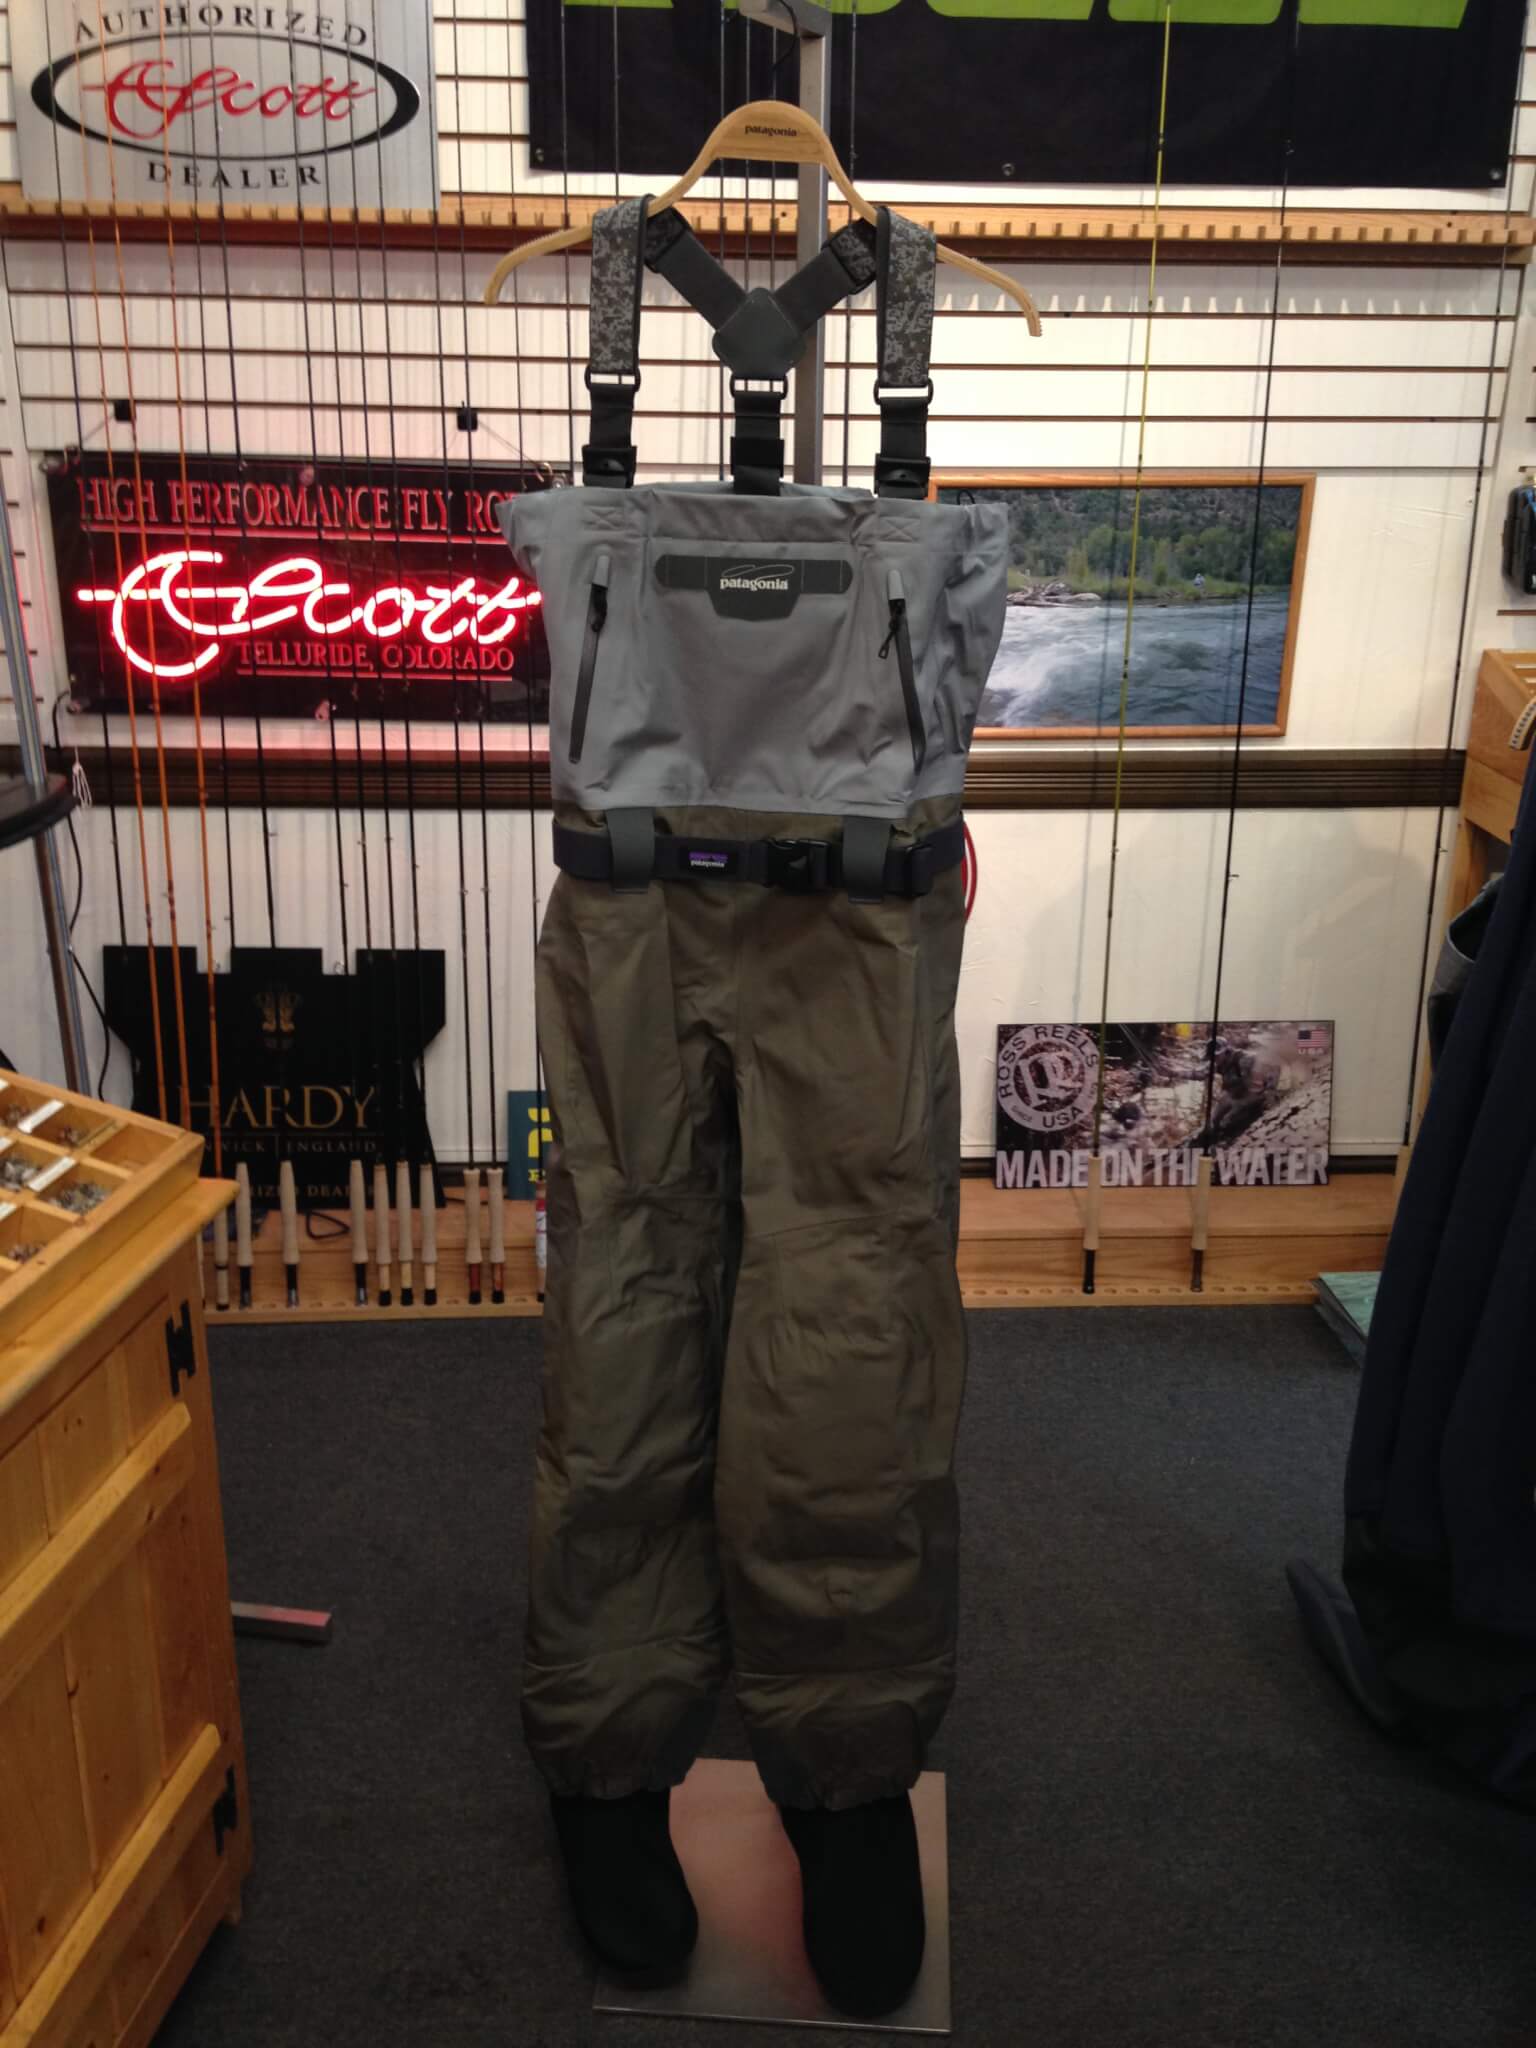 Many improvements were made to the 2016 version of the Patagonia Rio Gallegos wader.